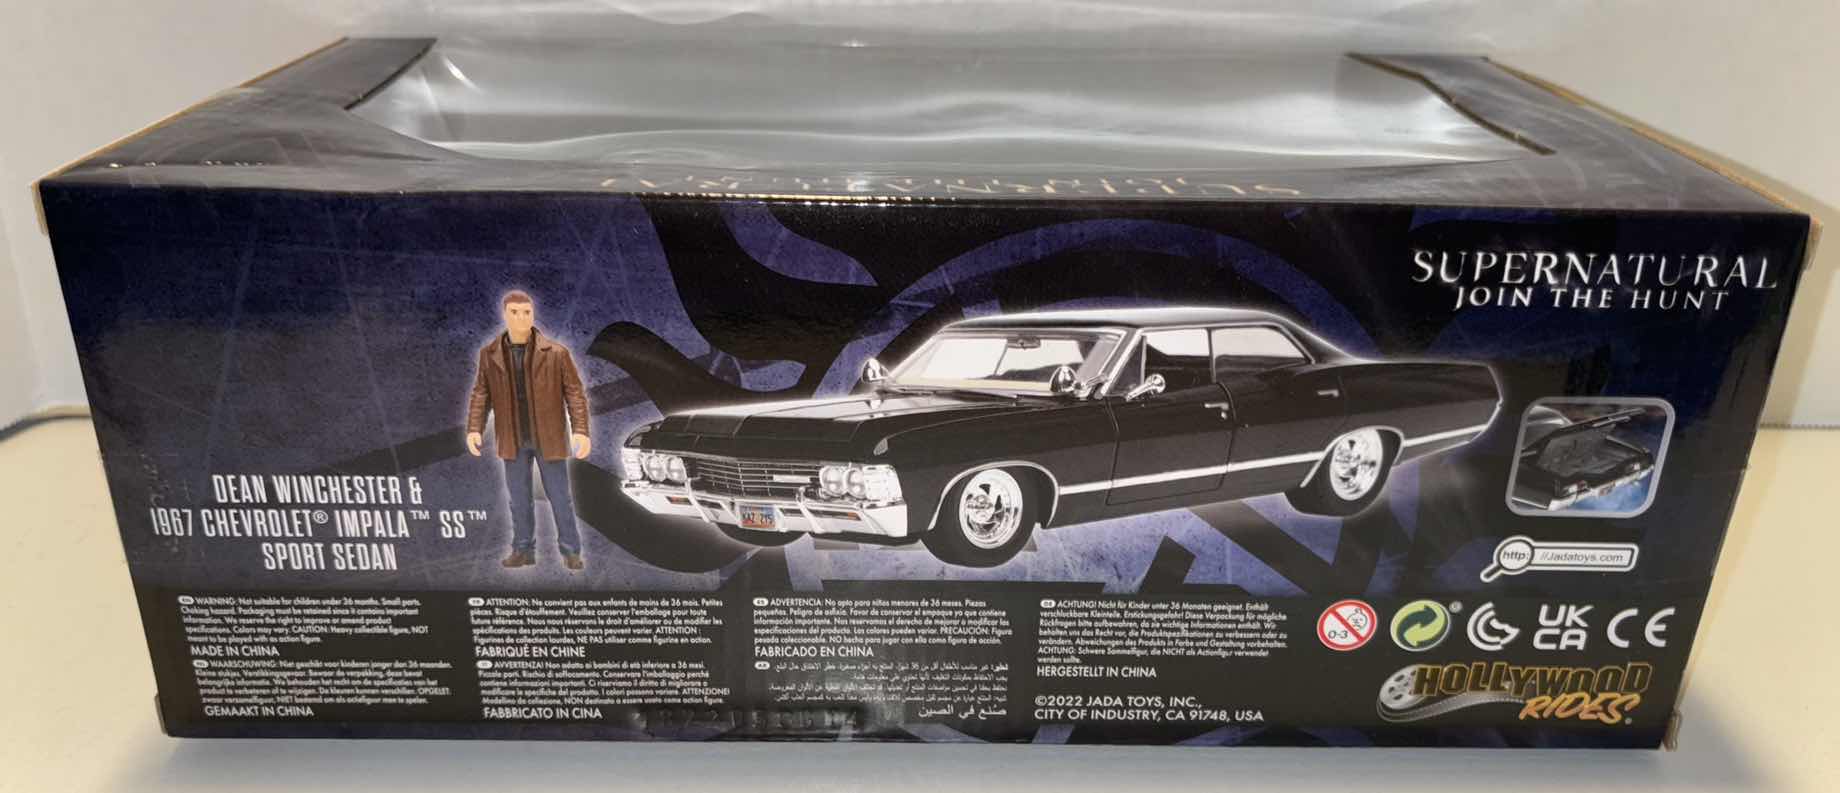 Photo 3 of NEW JADA TOYS HOLLYWOOD RIDES DIE-CAST VEHICLE & FIGURE, SUPERNATURAL JOIN THE HUNT “DEAN WINCHESTER & 1967 CHEVROLET IMPALA SS SPORT SEDAN”